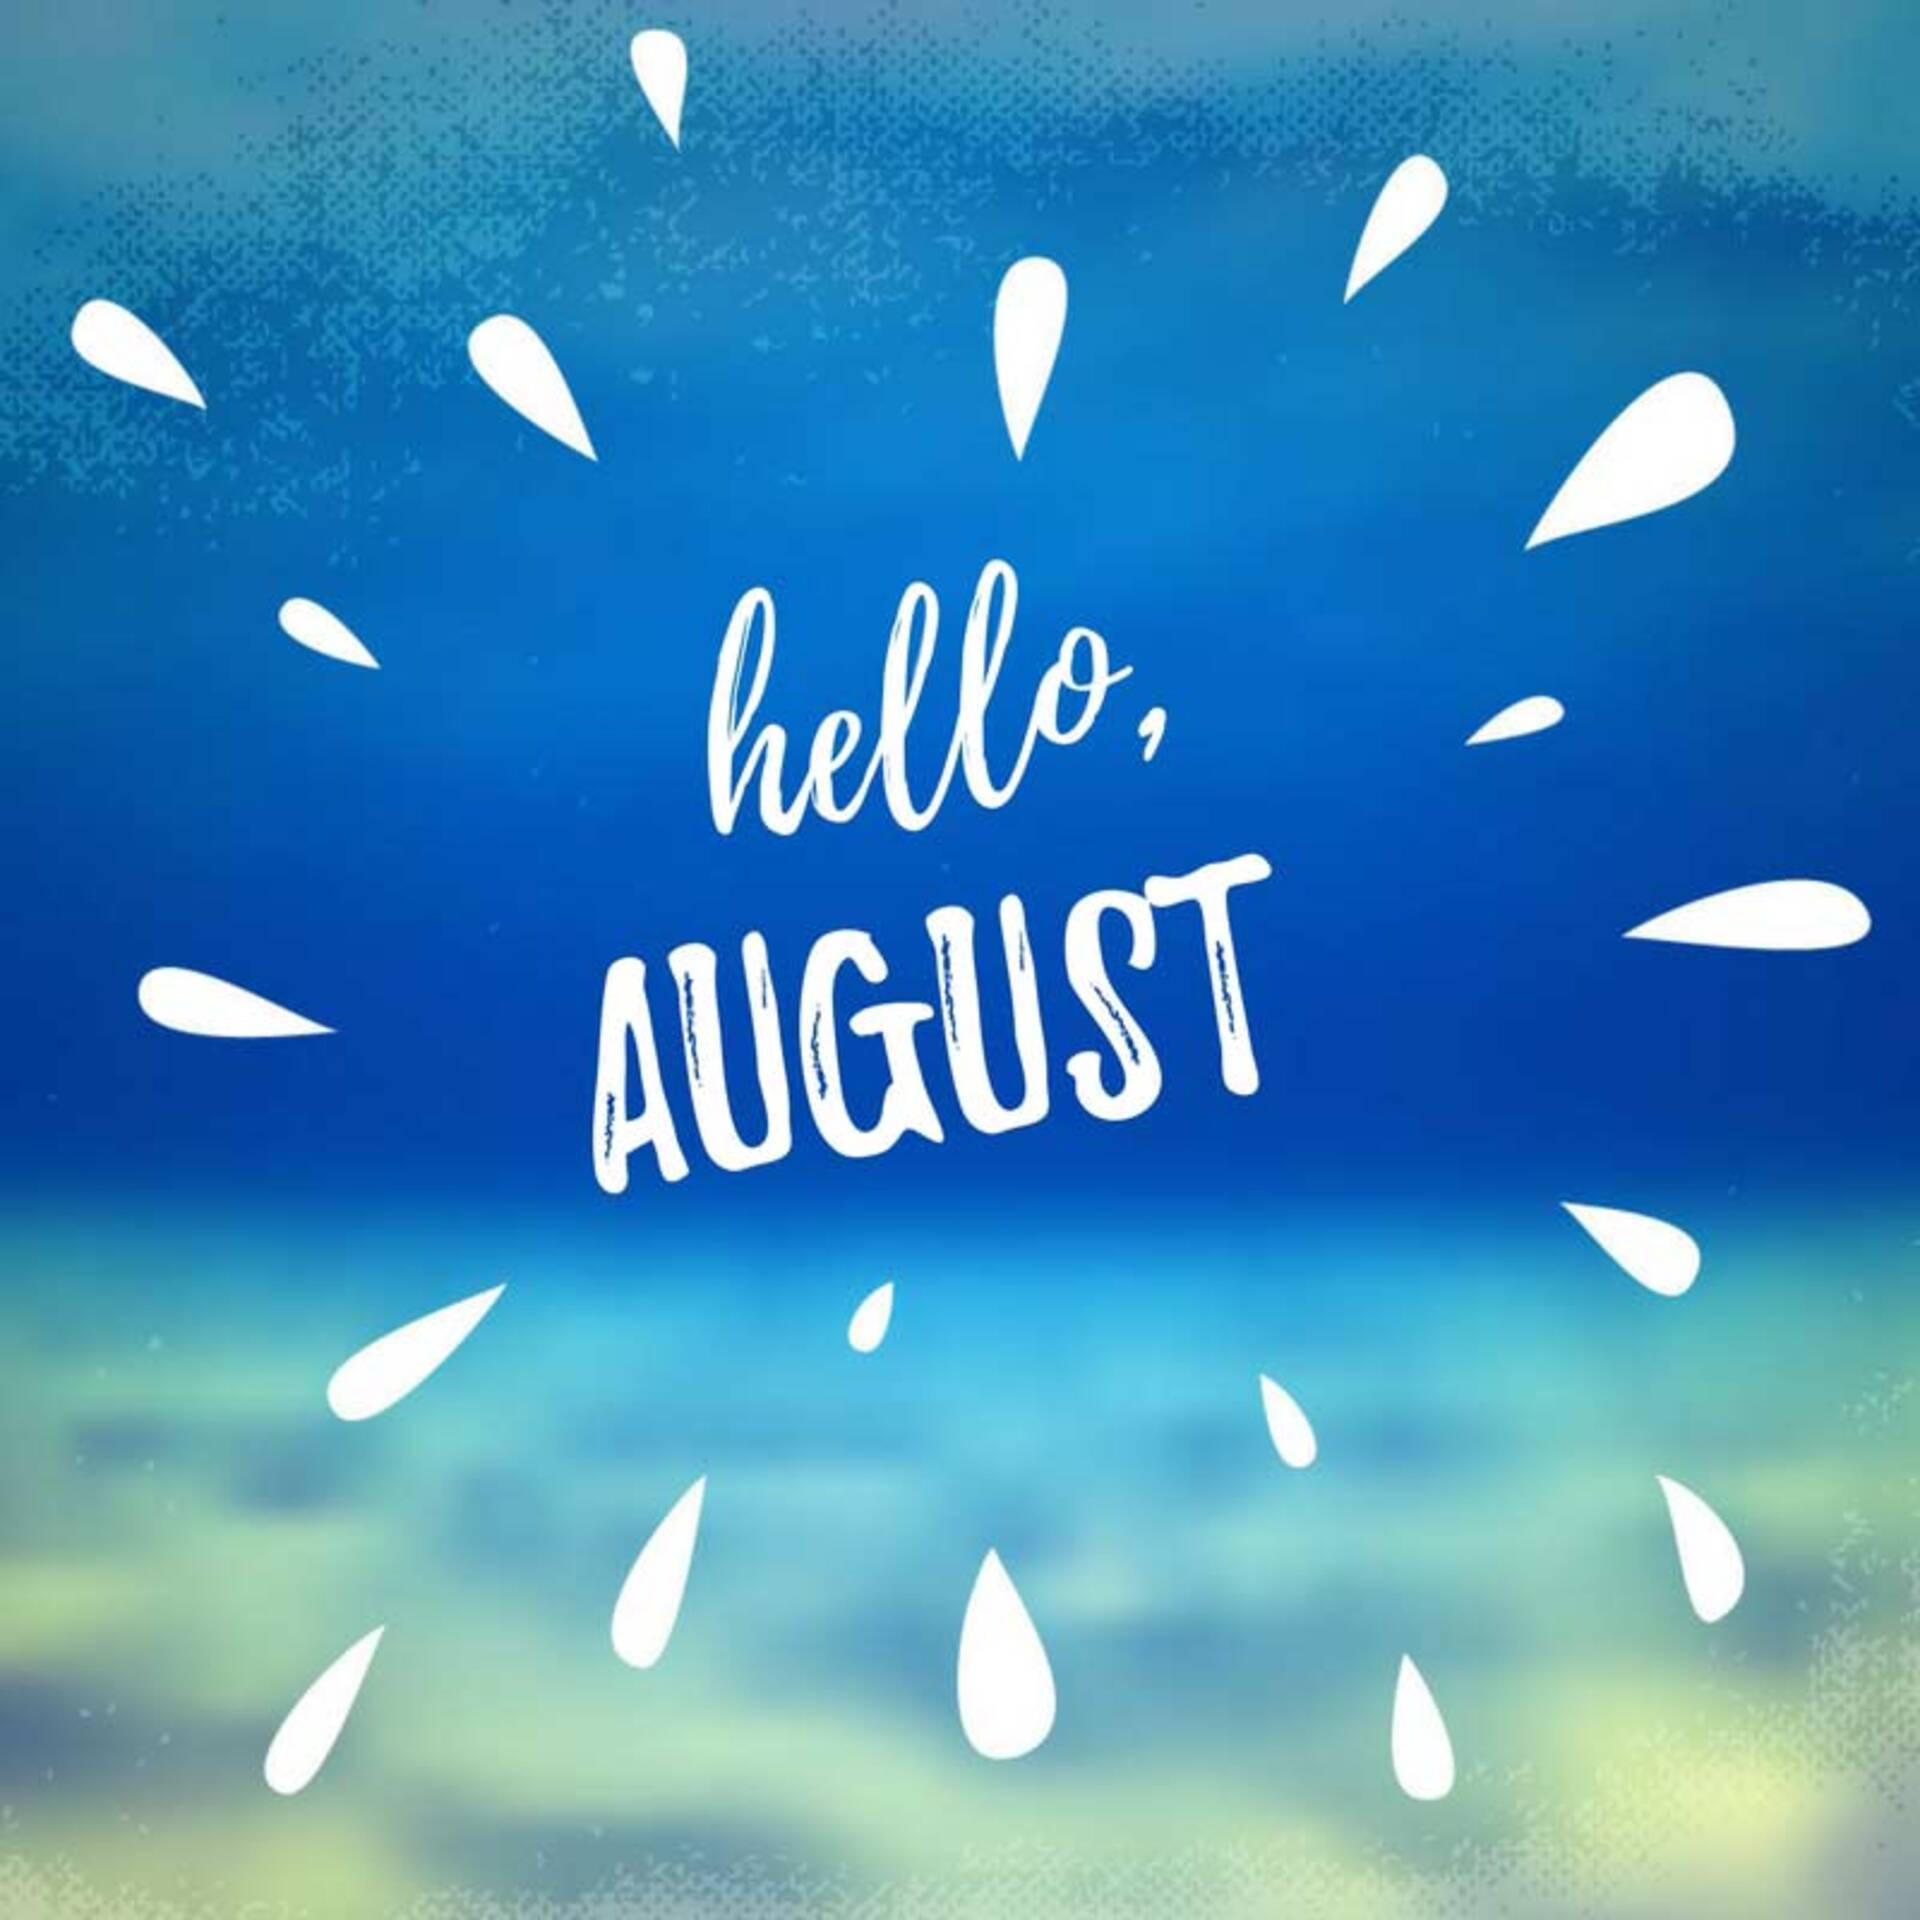 Warm Greetings For August! Background